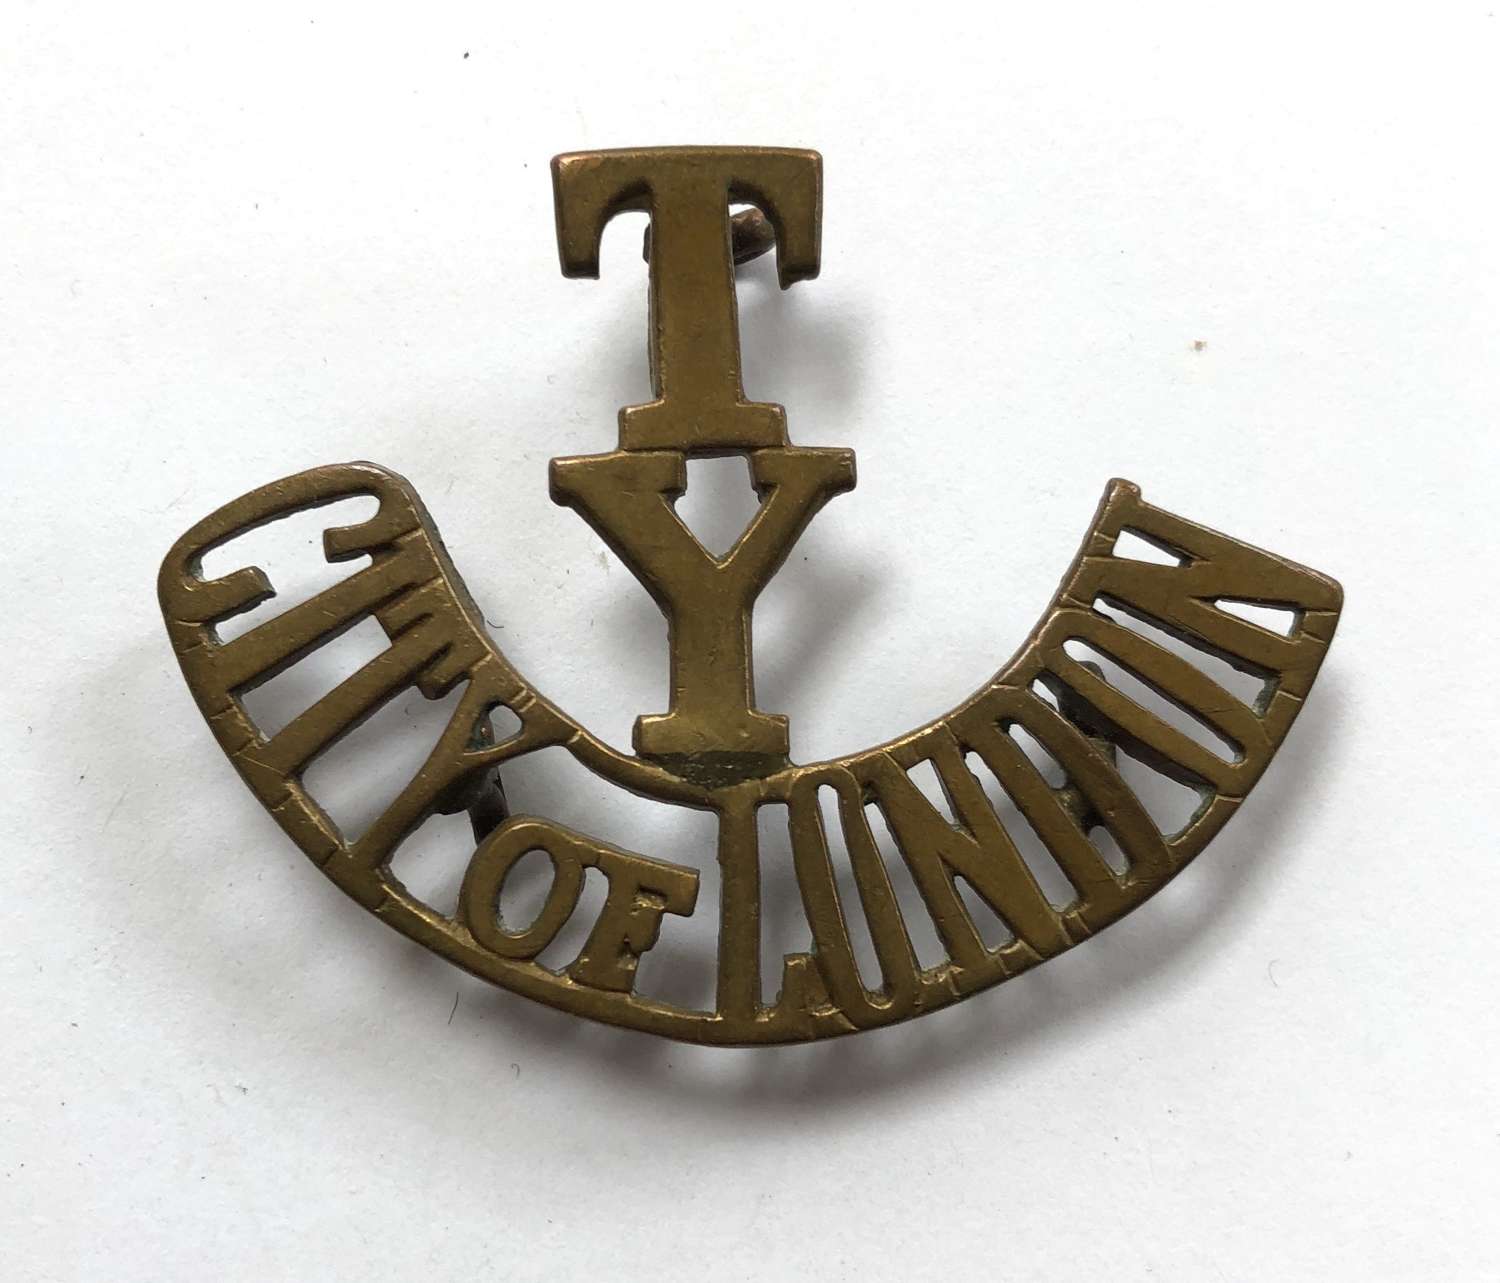 T / Y / CITY OF LONDON Rough Riders post 1908 shoulder title